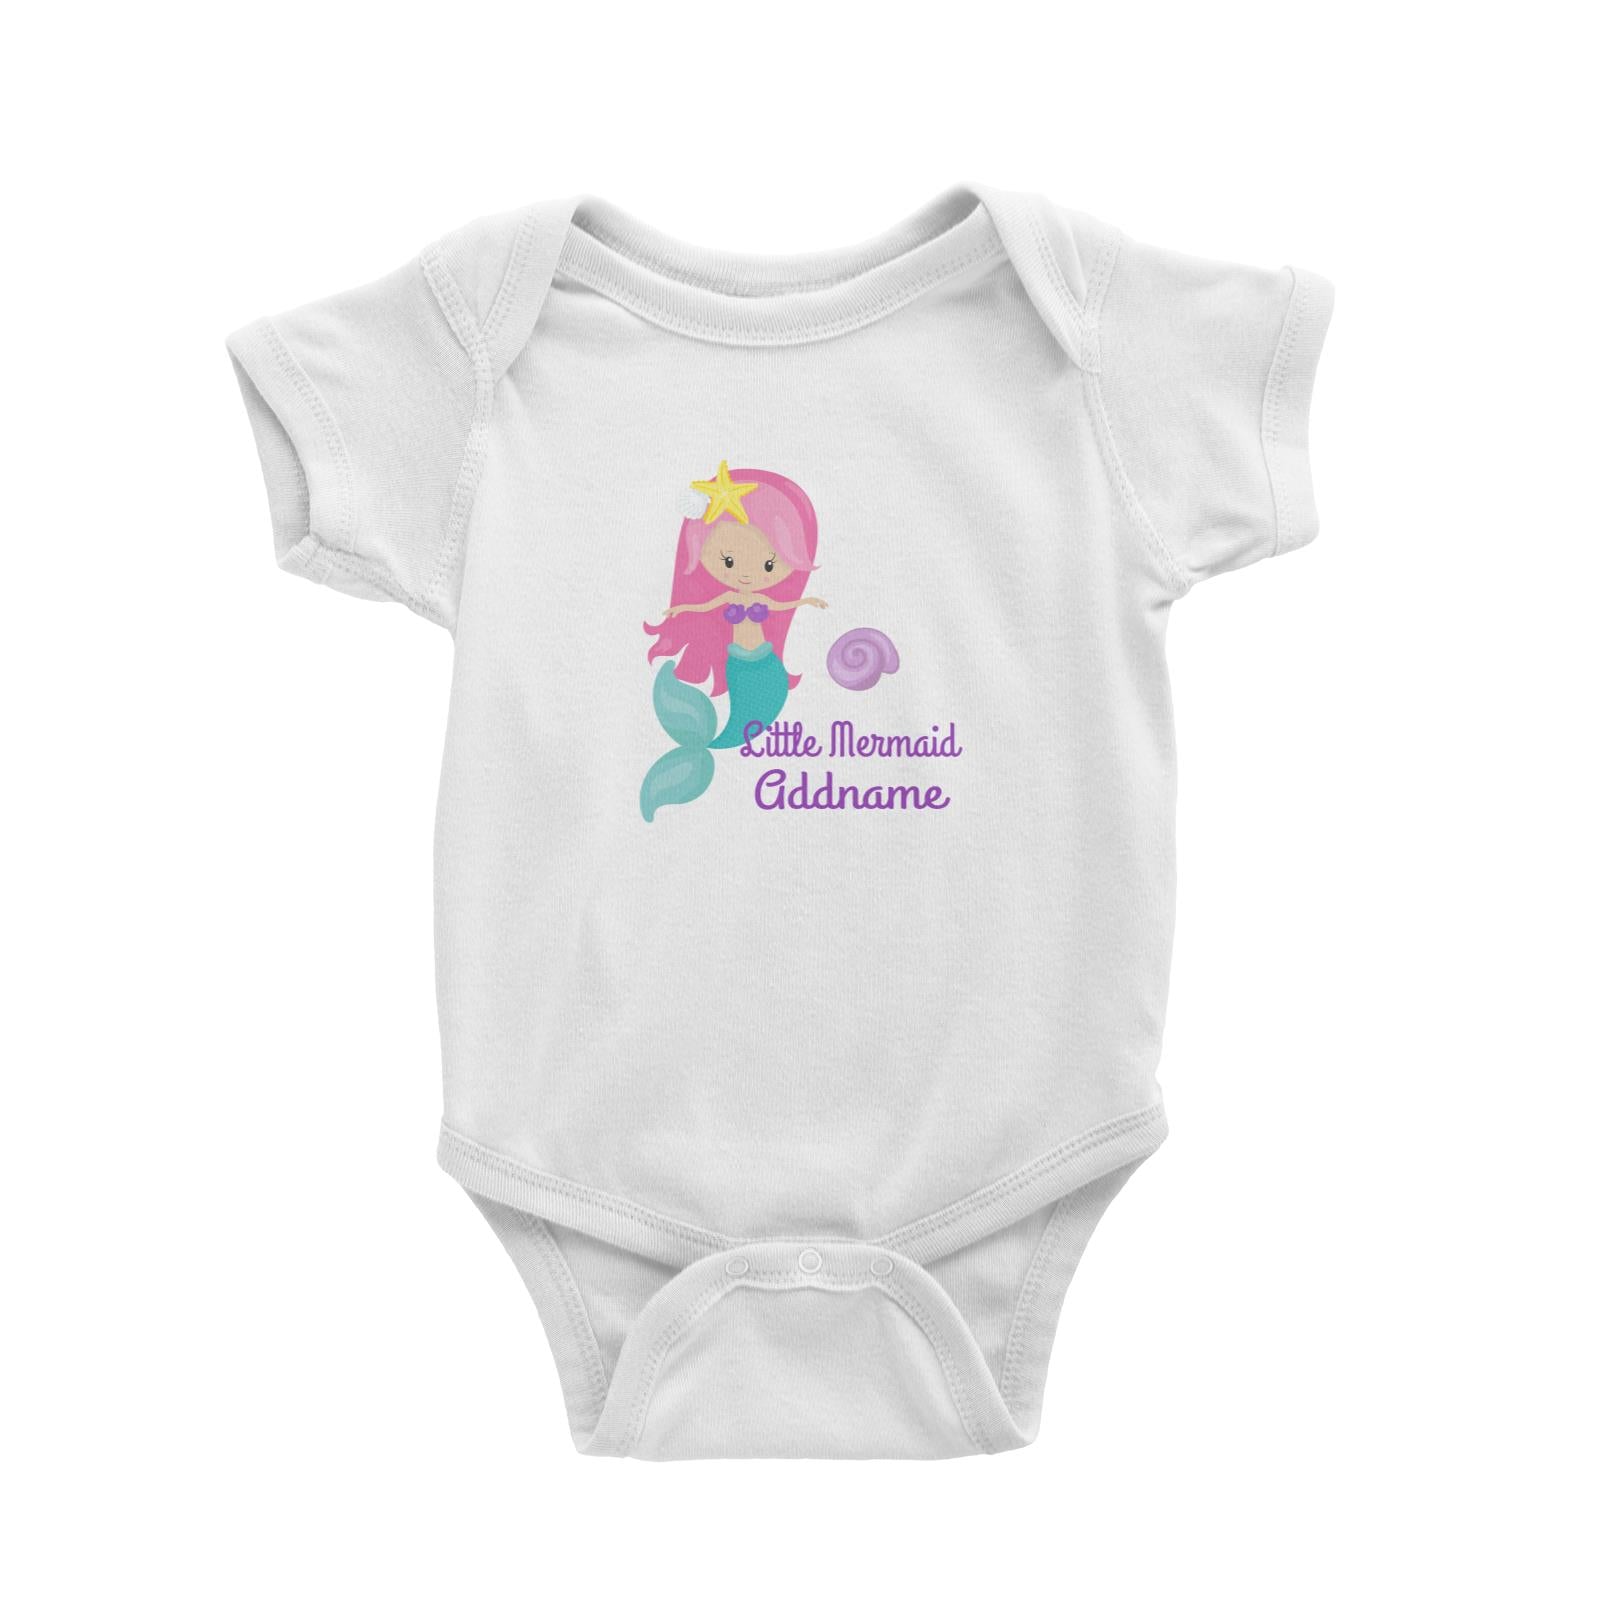 Little Mermaid Upright with Seashell Addname White Baby Romper